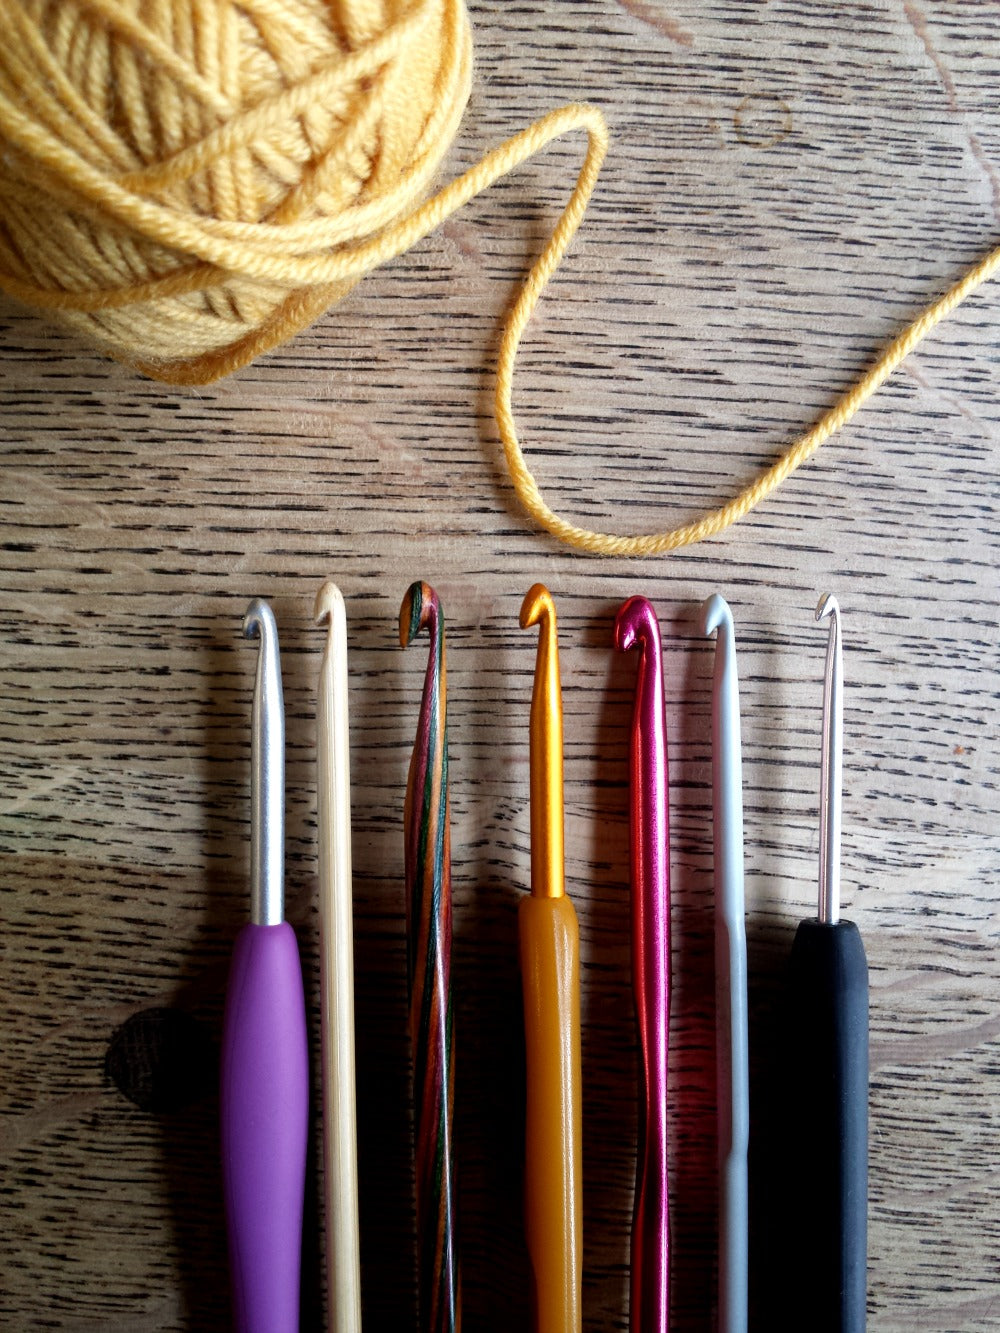 a range of crochet hooks and a yellow ball of yarn sit on a wooden background